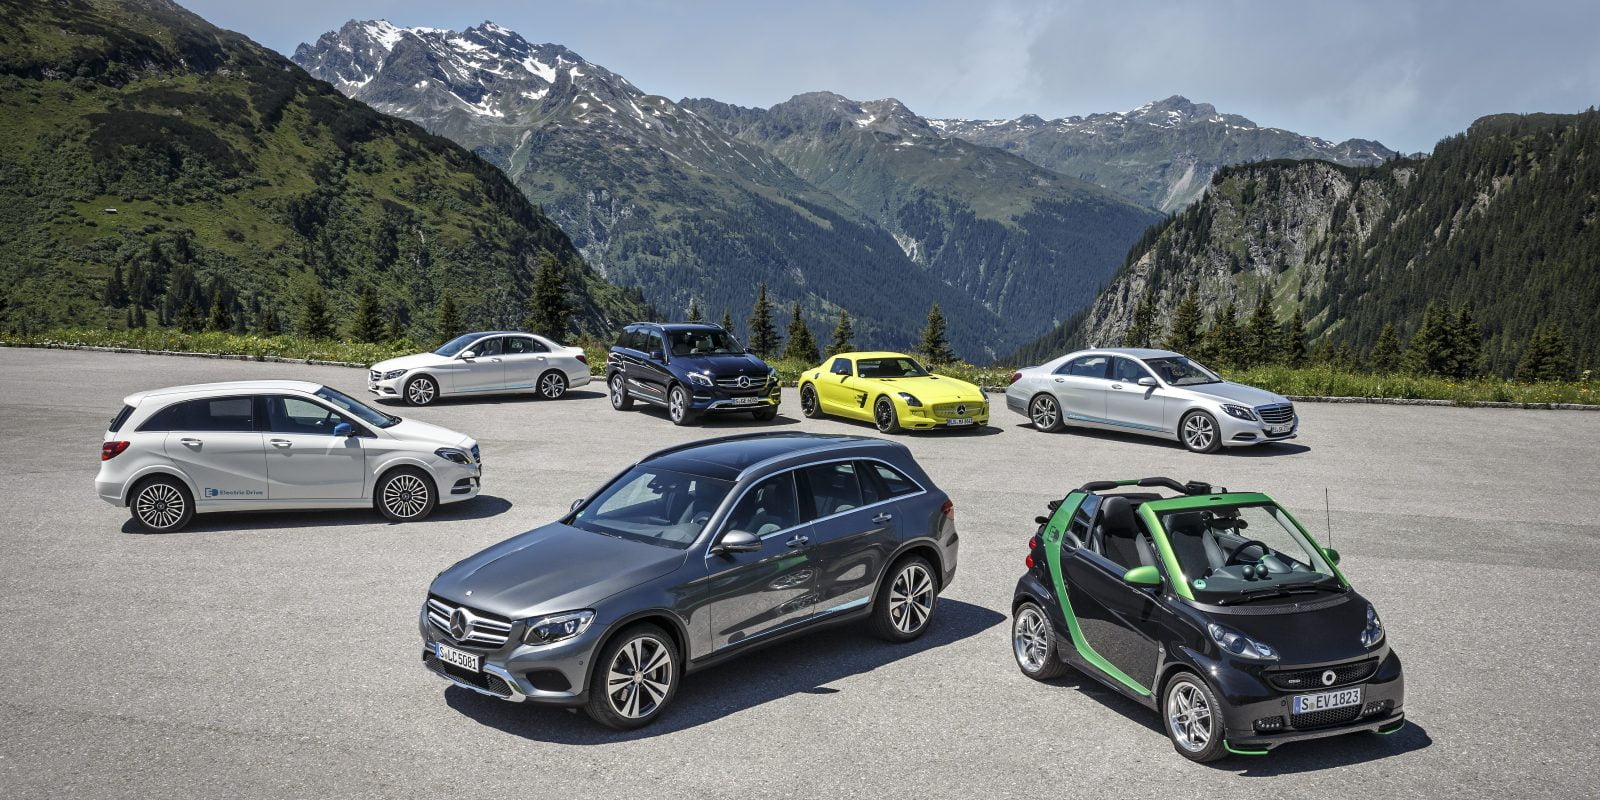 Daimler's Smart Brand to Focus on Electric Vehicles by 2018